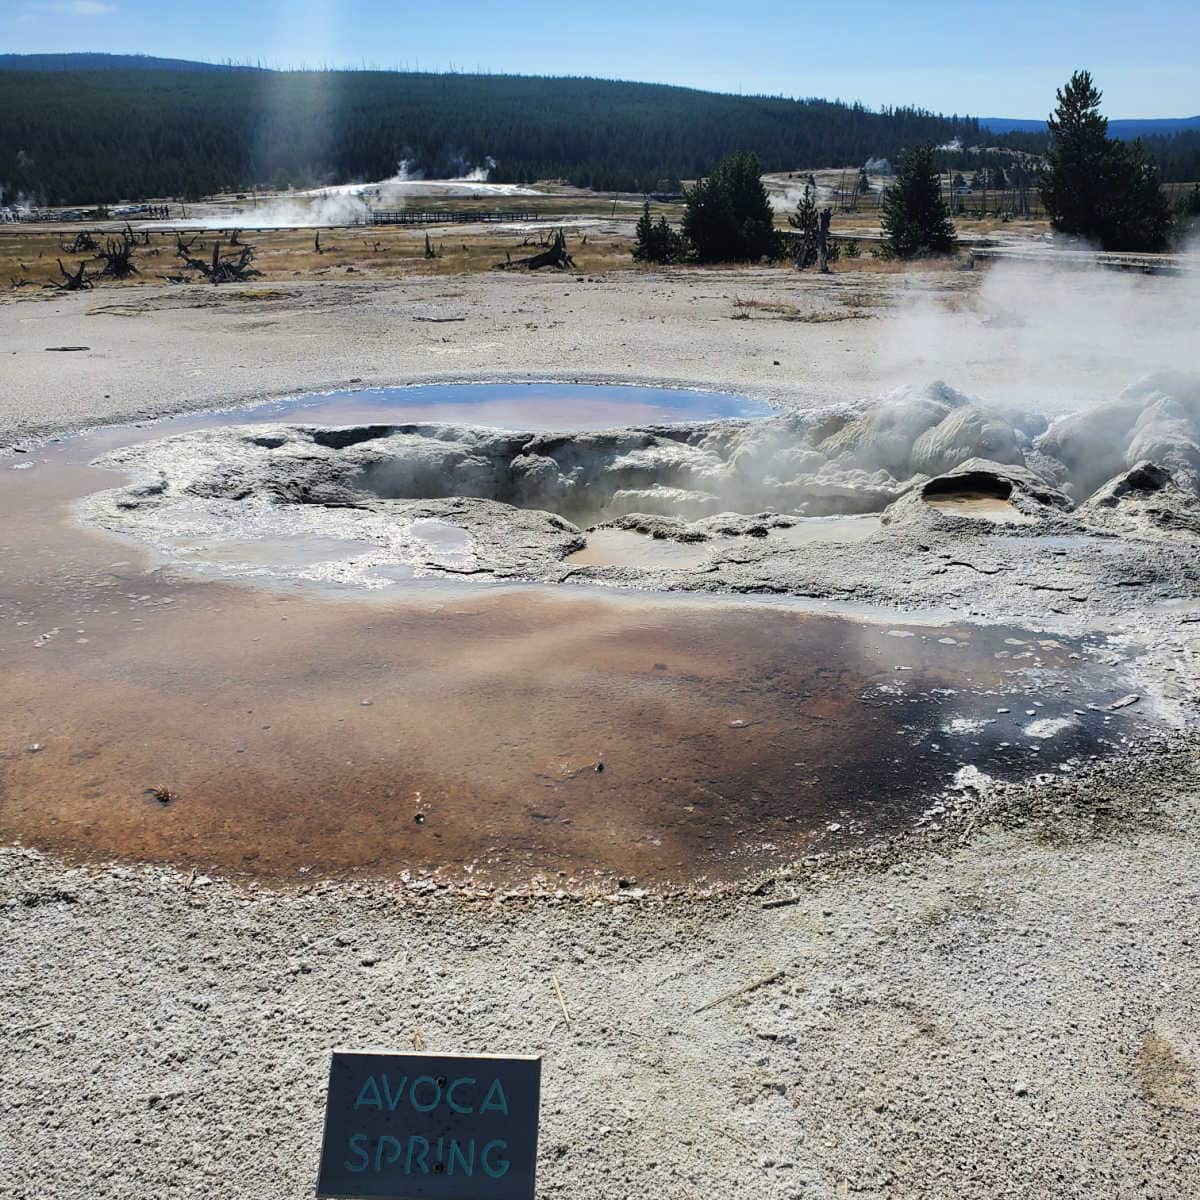 Avoca Spring Biscuit Basin Yellowstone National Park